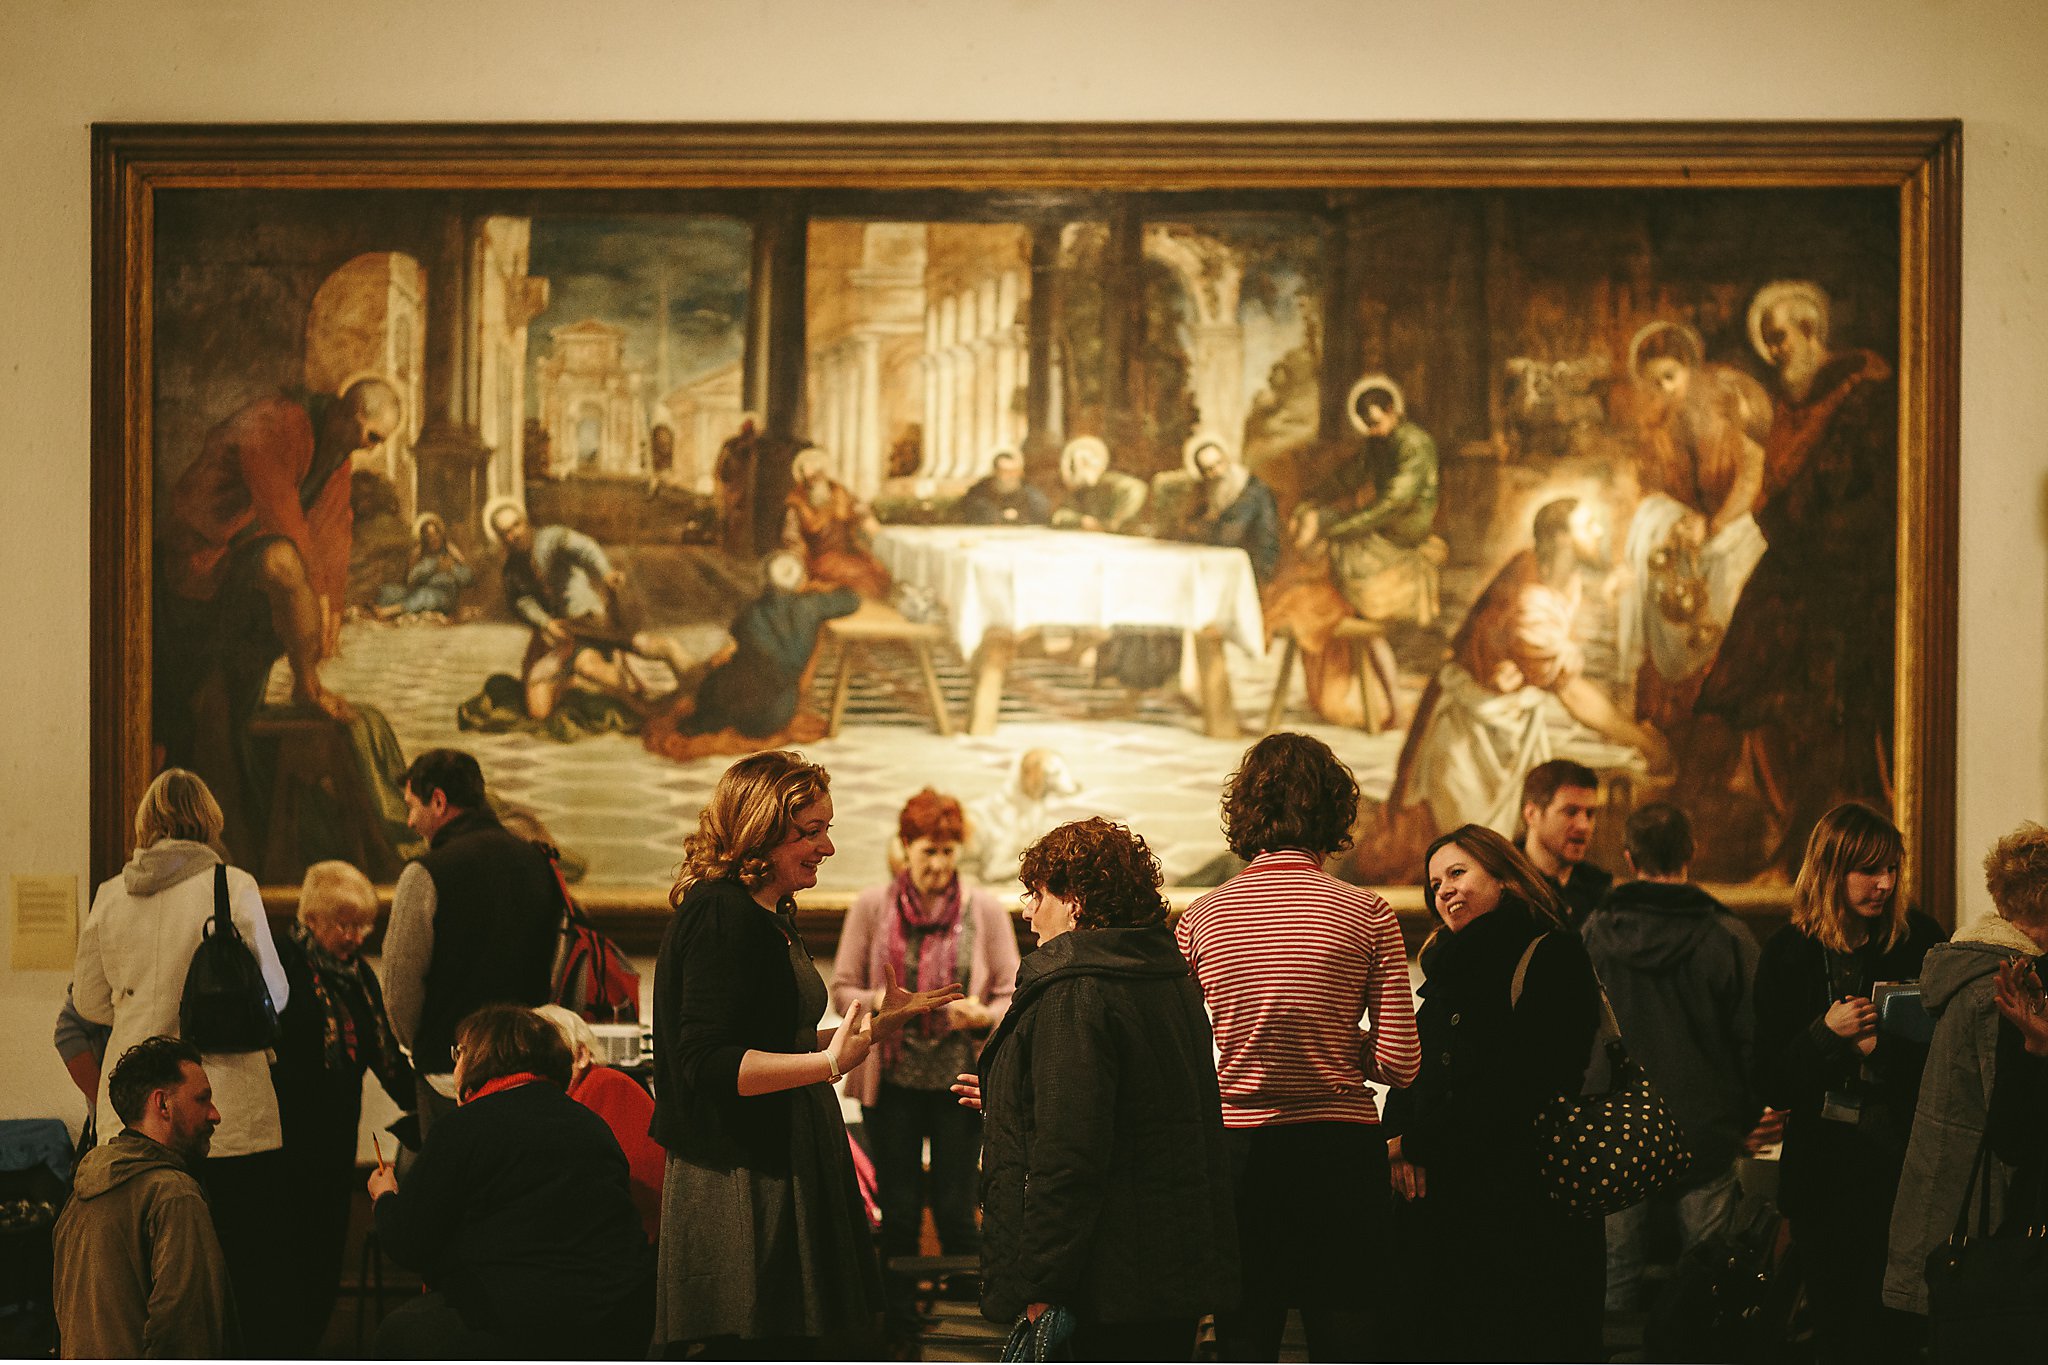 A group socialising in front of a large painting in a museum.